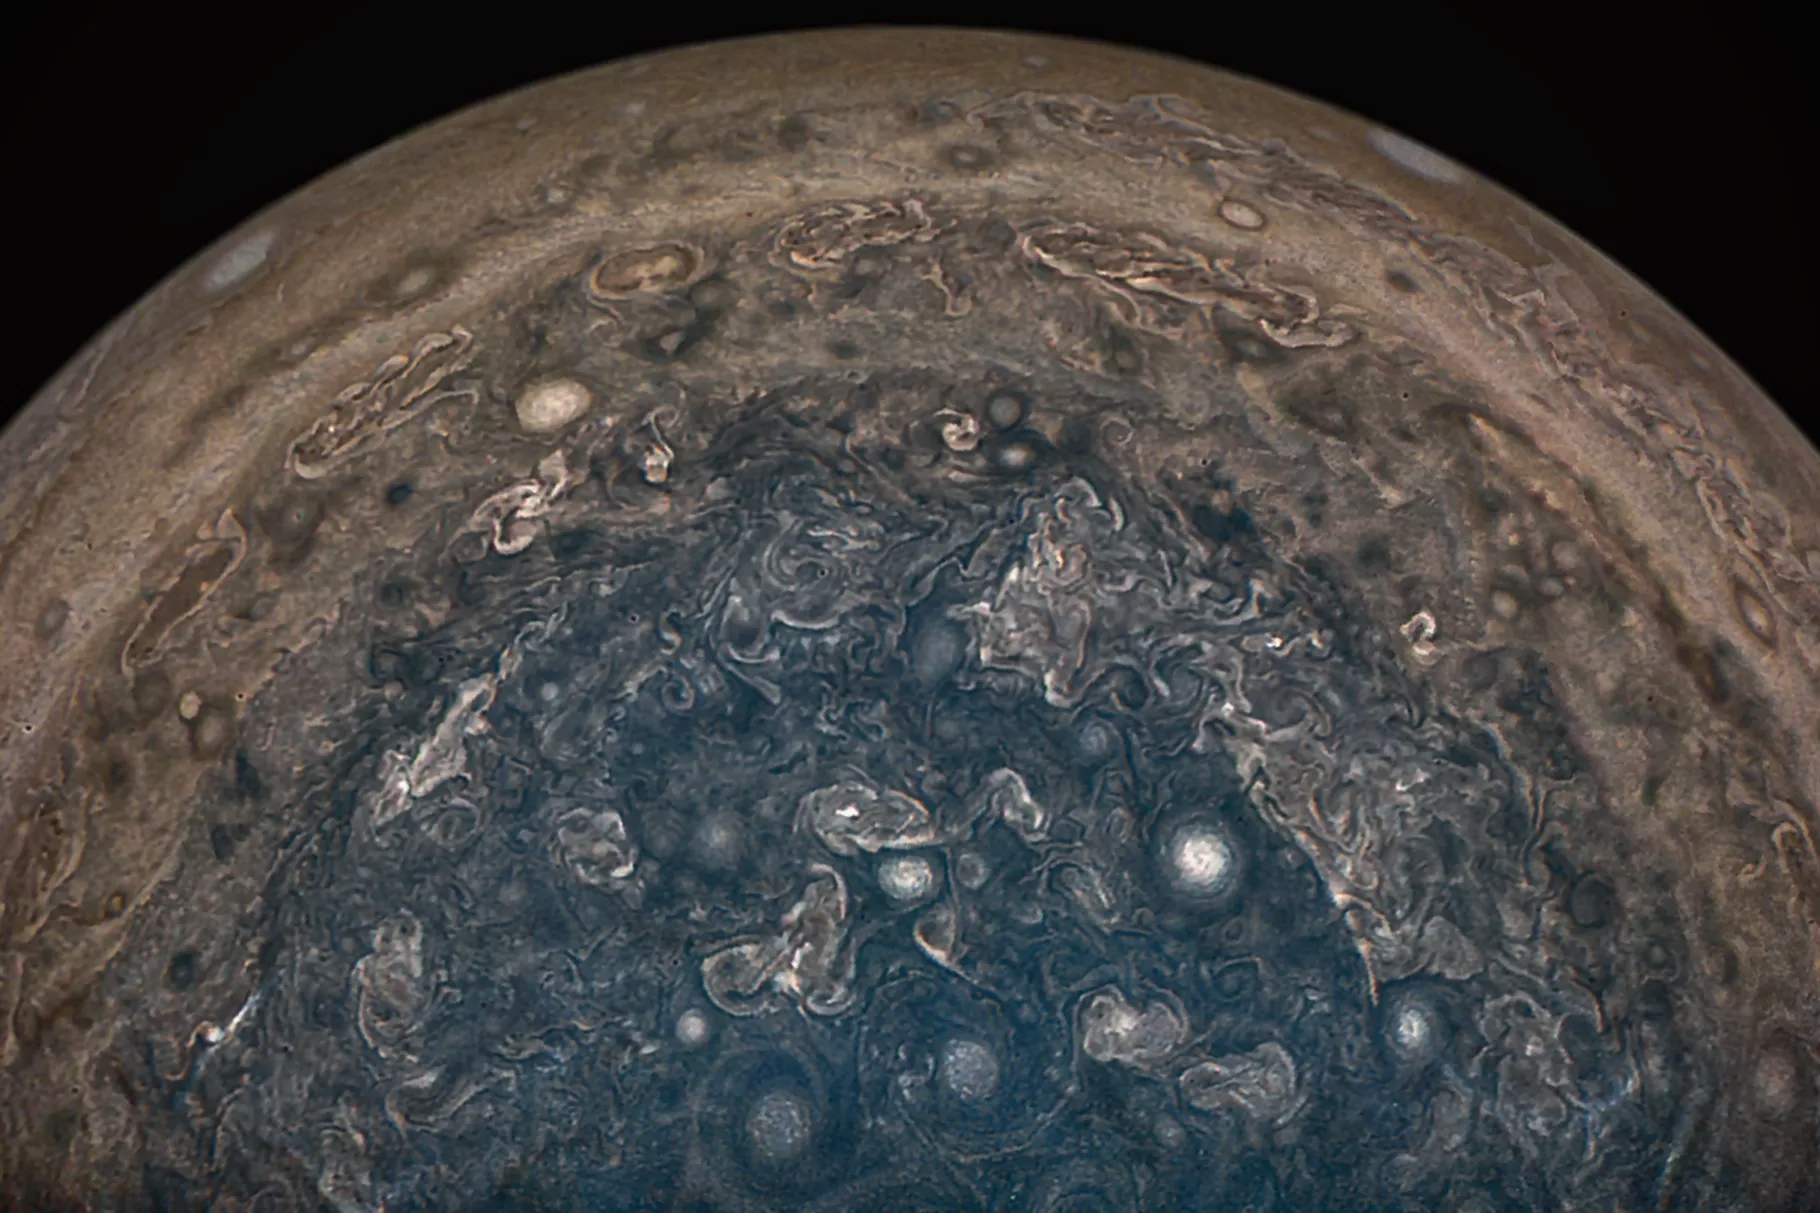 Jupiter's planet-sized cyclones